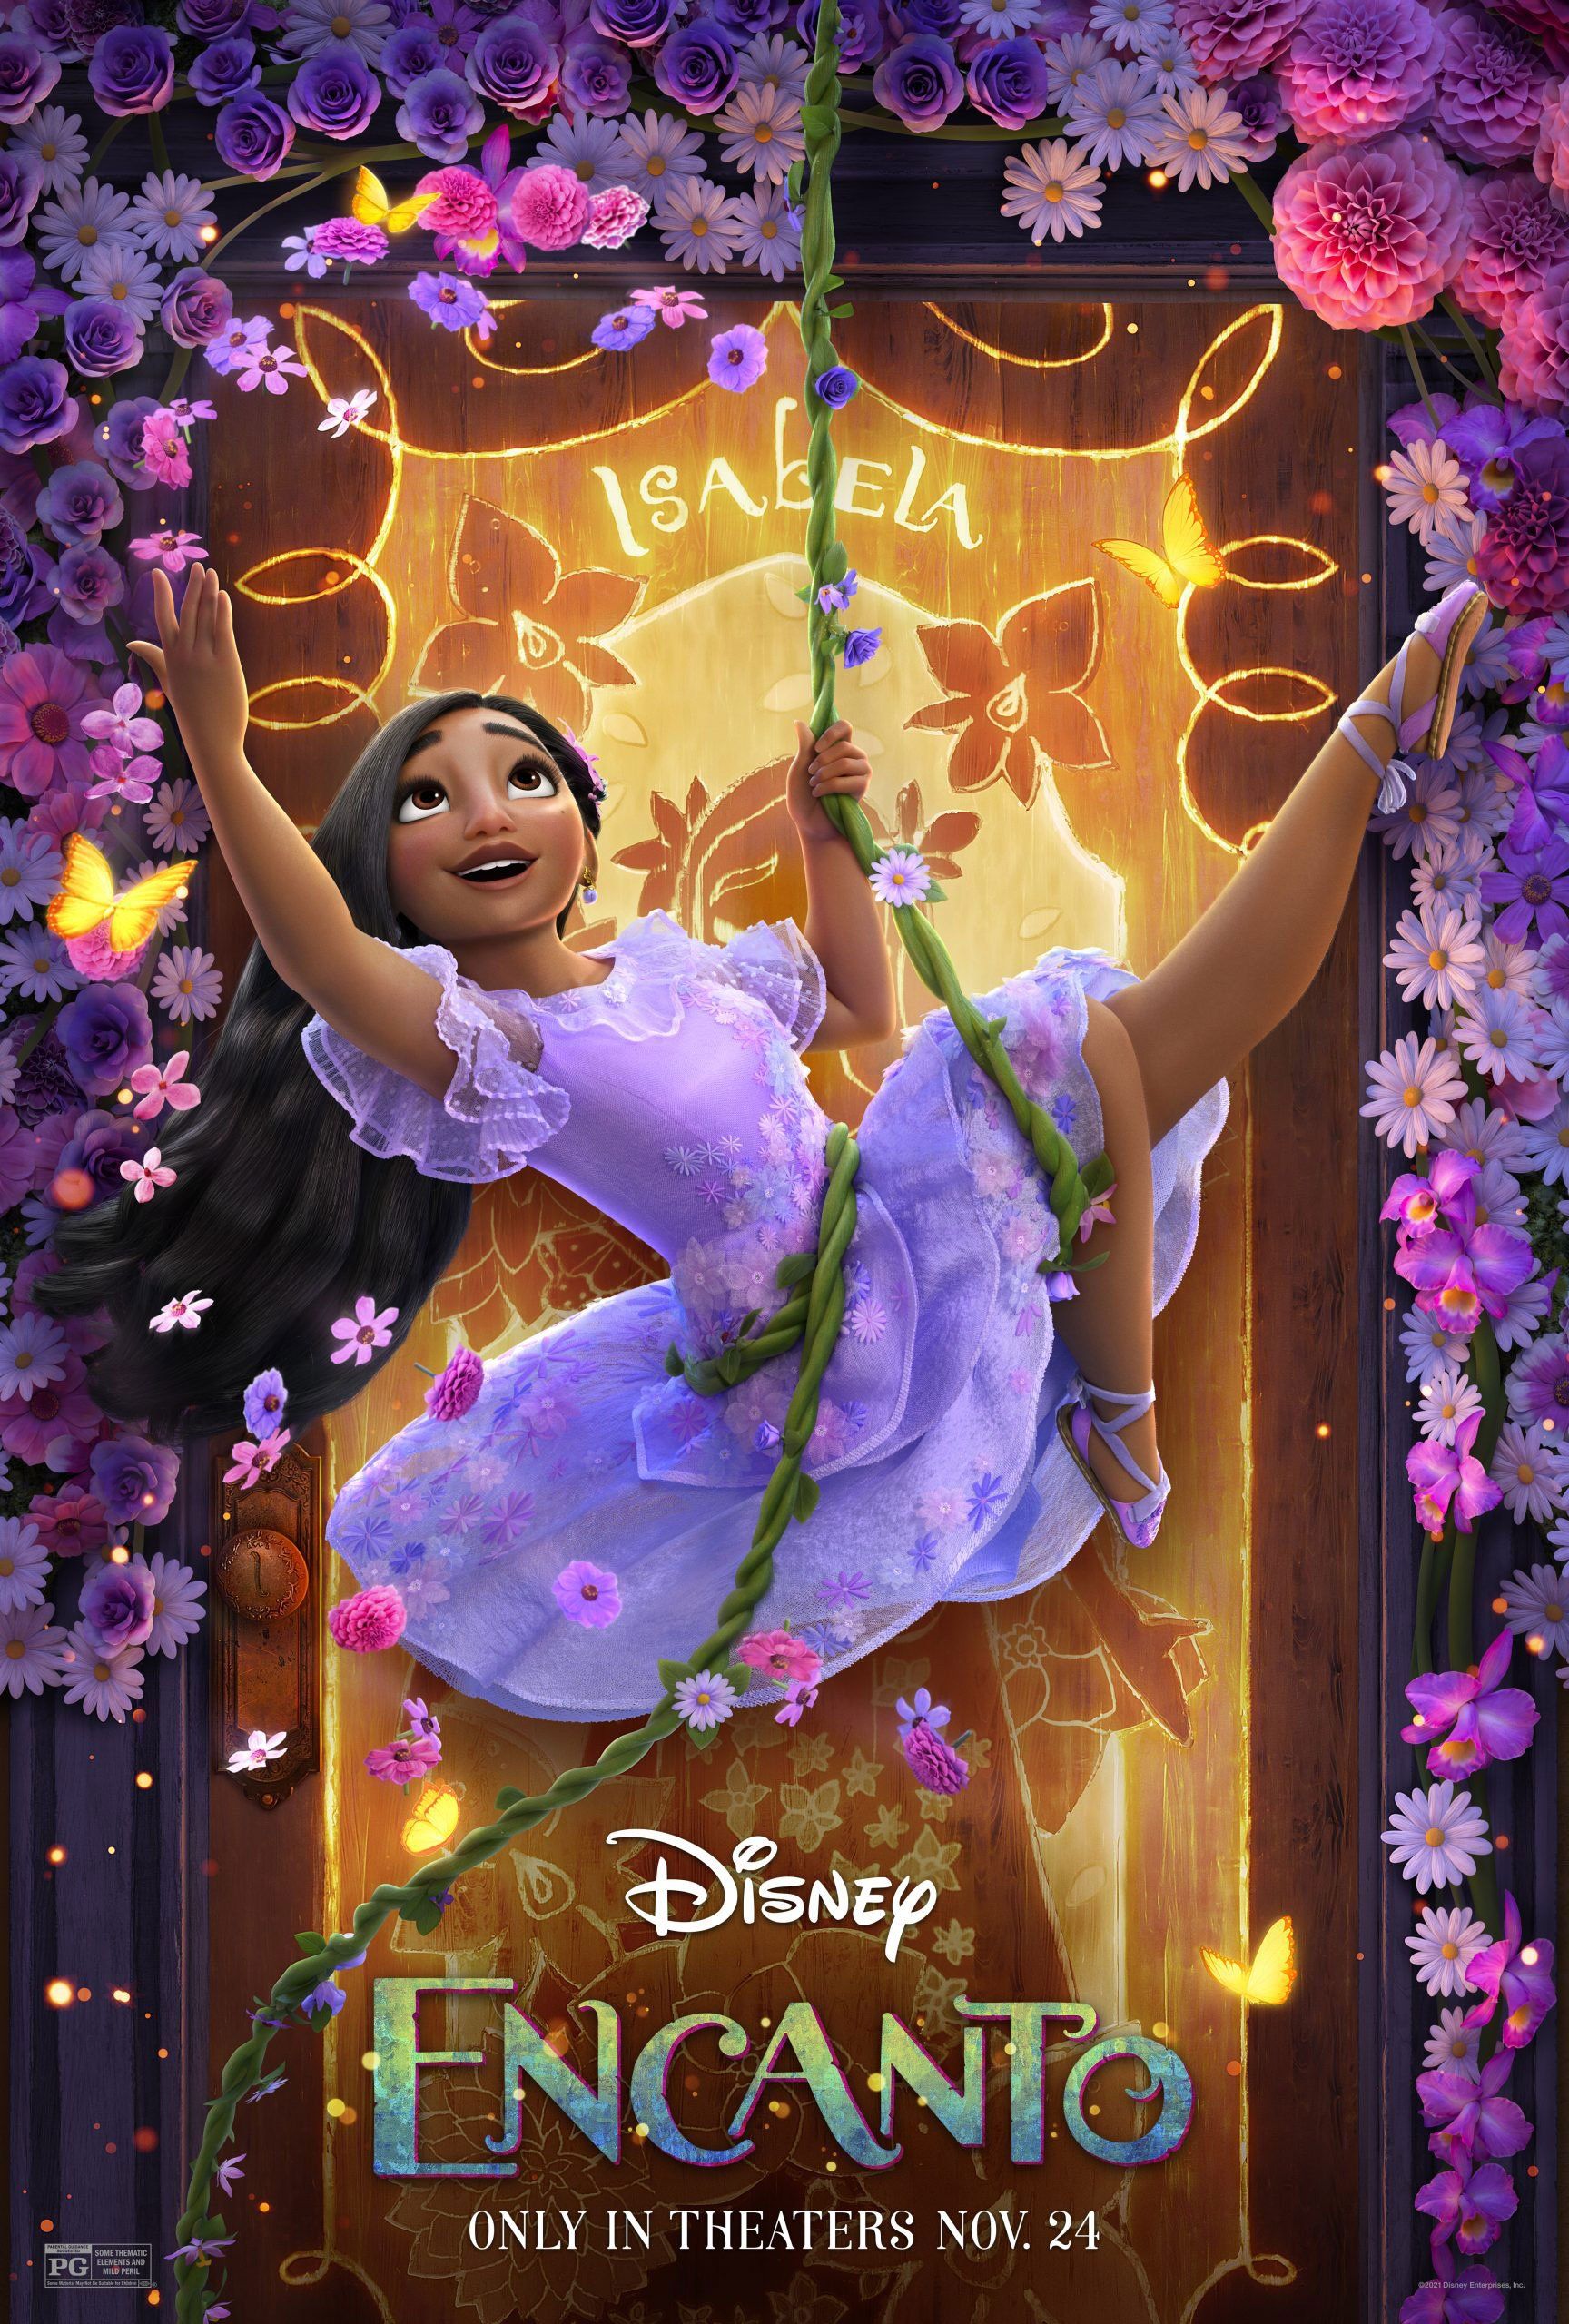 Disney Encanto movie poster with Isabela hanging from a vine with flowers around her - Encanto